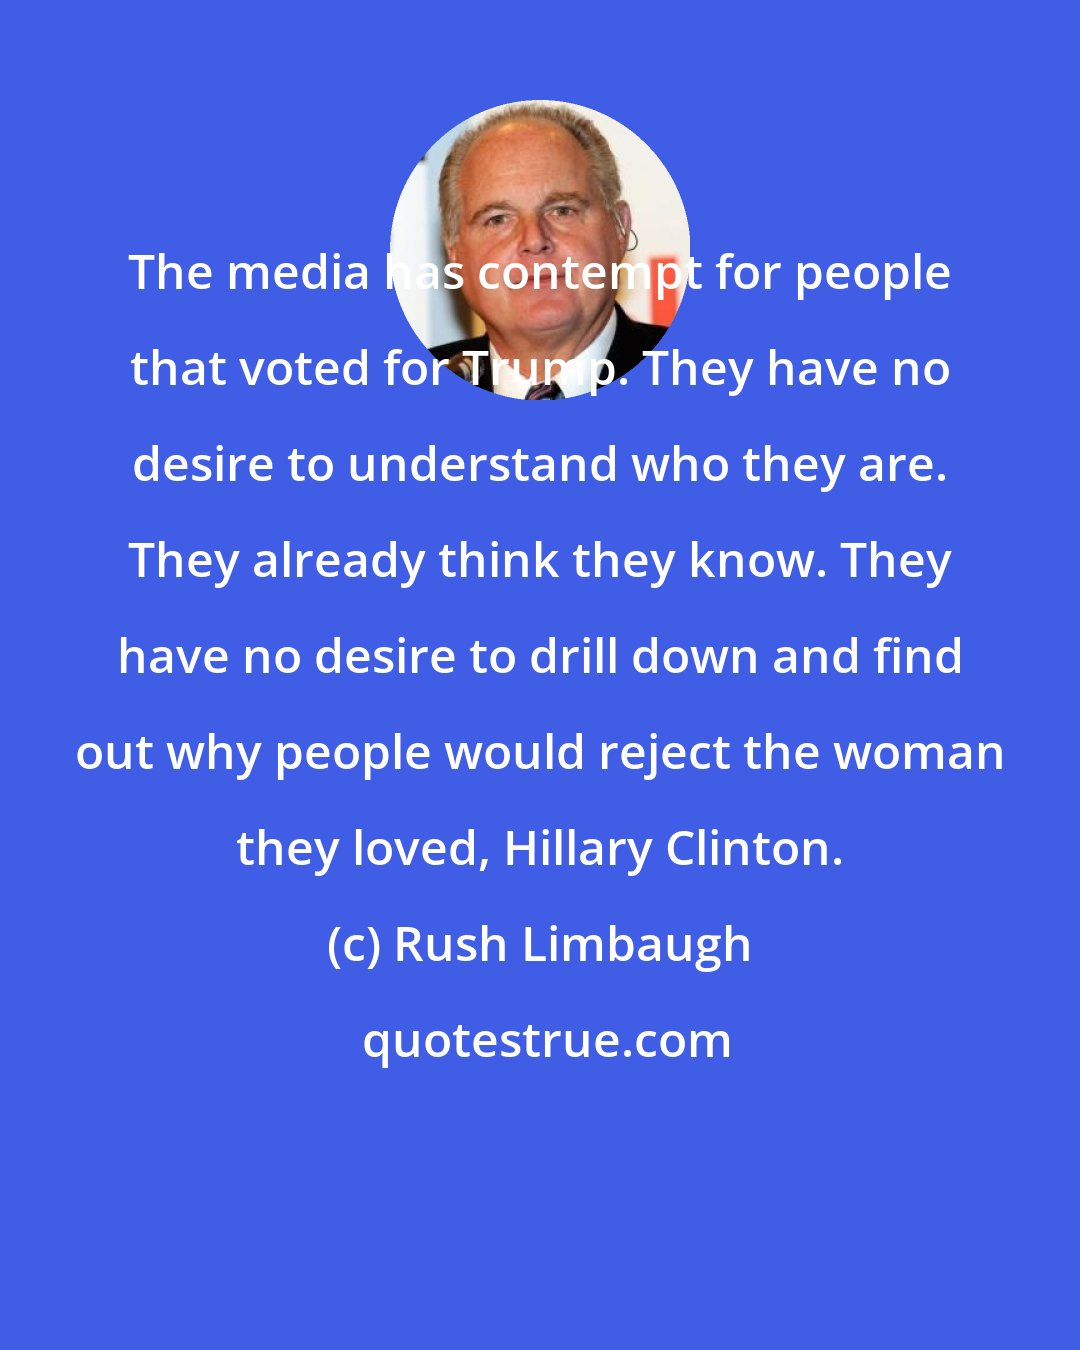 Rush Limbaugh: The media has contempt for people that voted for Trump. They have no desire to understand who they are. They already think they know. They have no desire to drill down and find out why people would reject the woman they loved, Hillary Clinton.